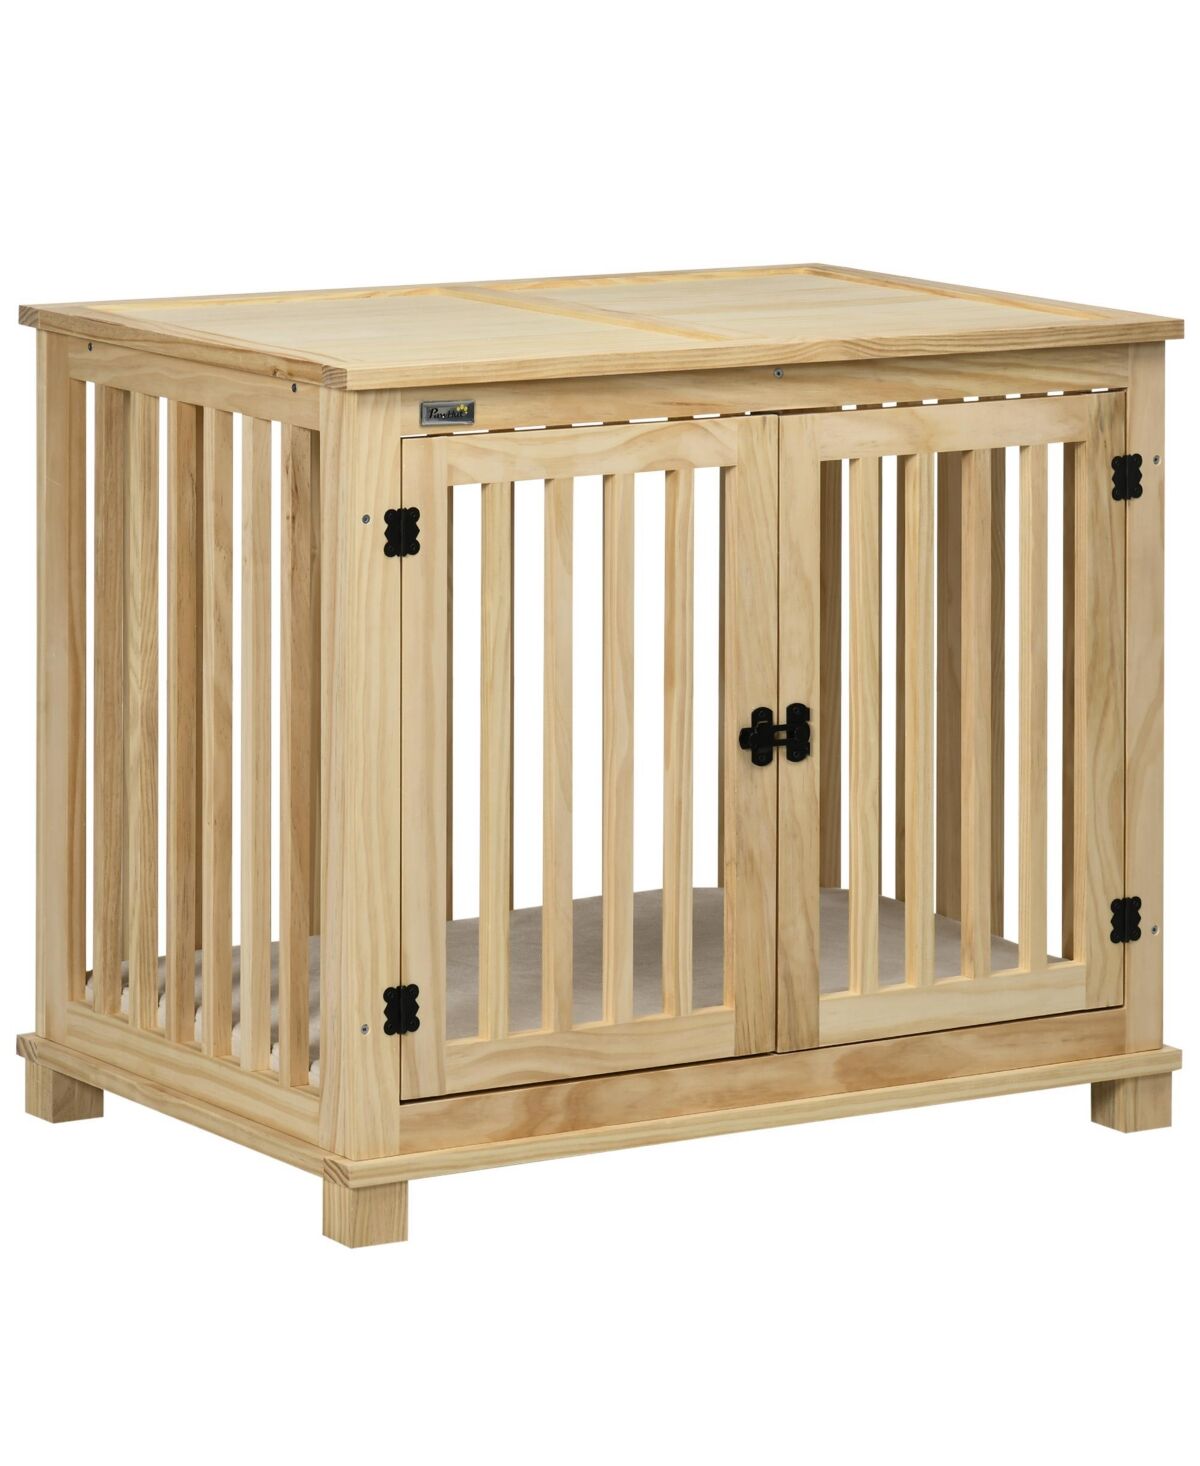 PawHut Wooden Dog Crate Furniture with Soft Cushion, Dog Crate End Table with Double Doors, Indoor Pet Crate for Small Medium Dogs - Natural